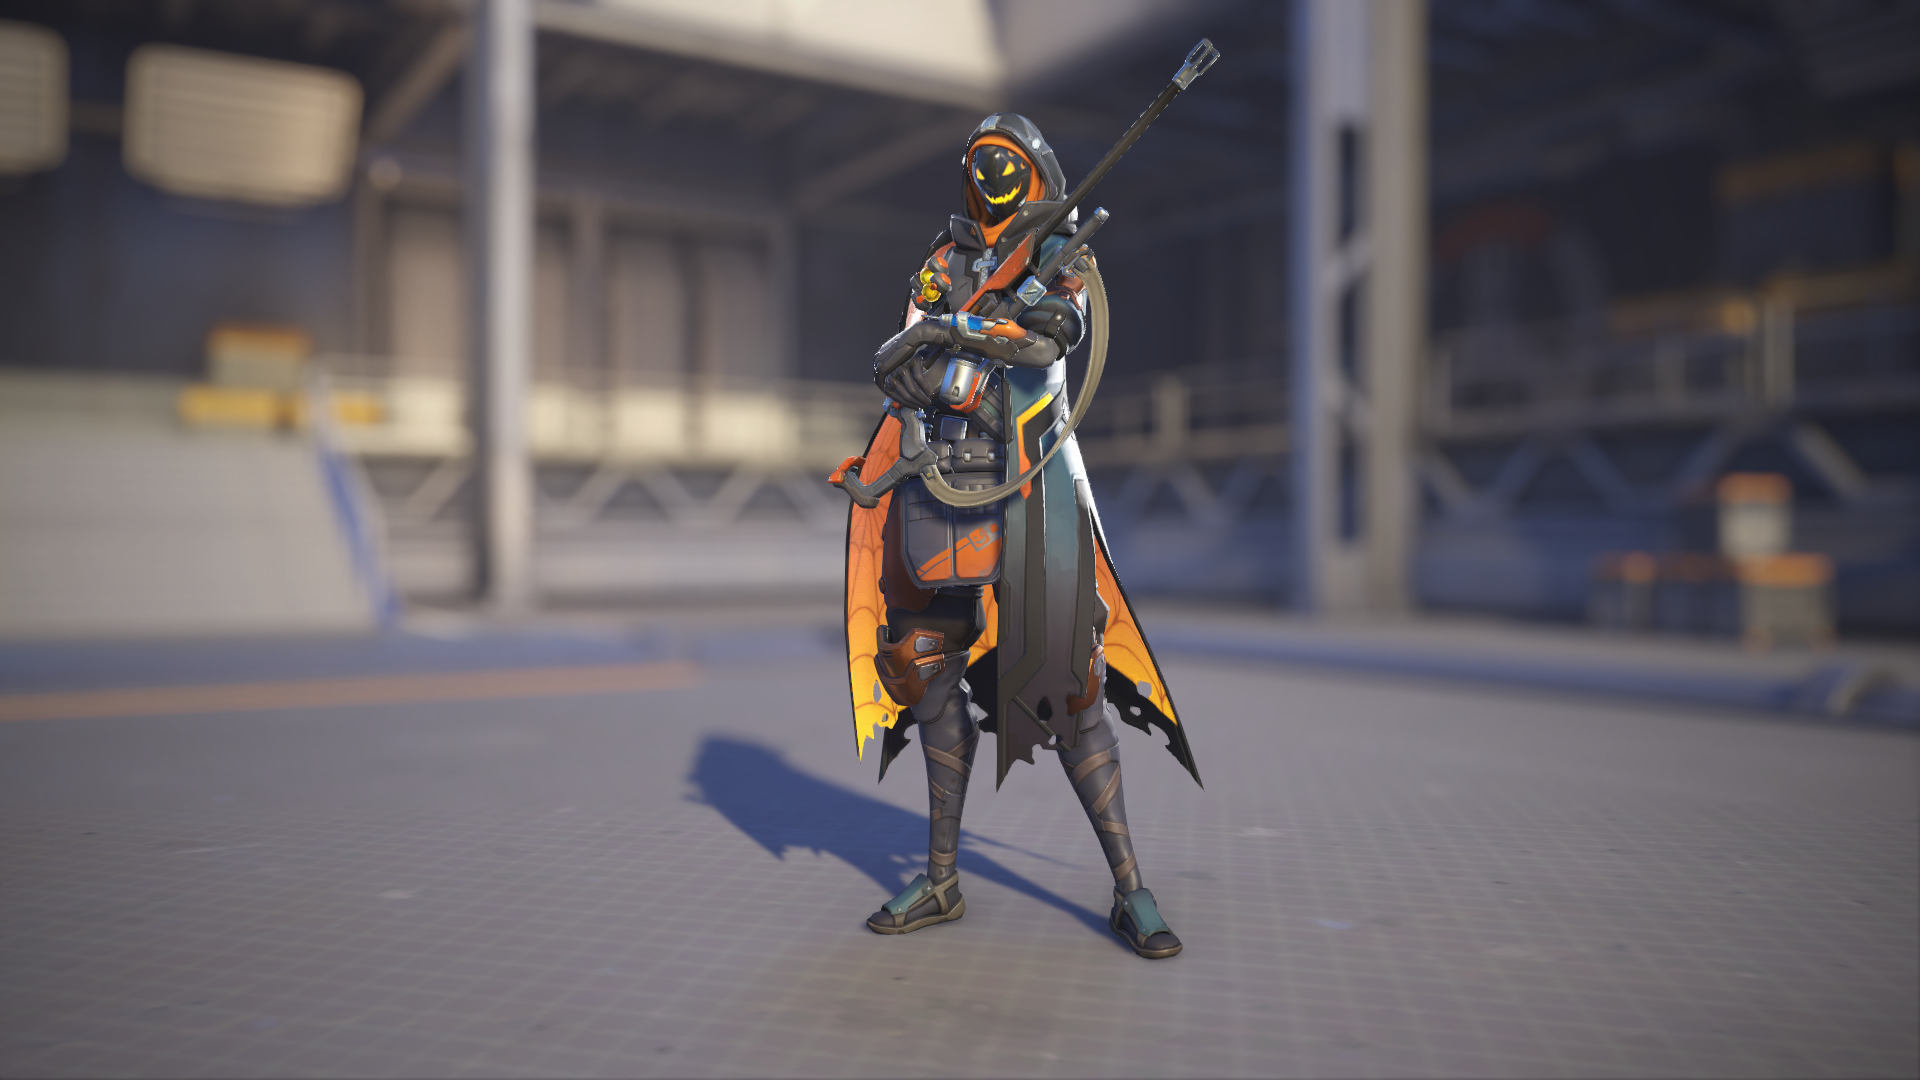 Ana models her Ghoul skin in Overwatch 2.